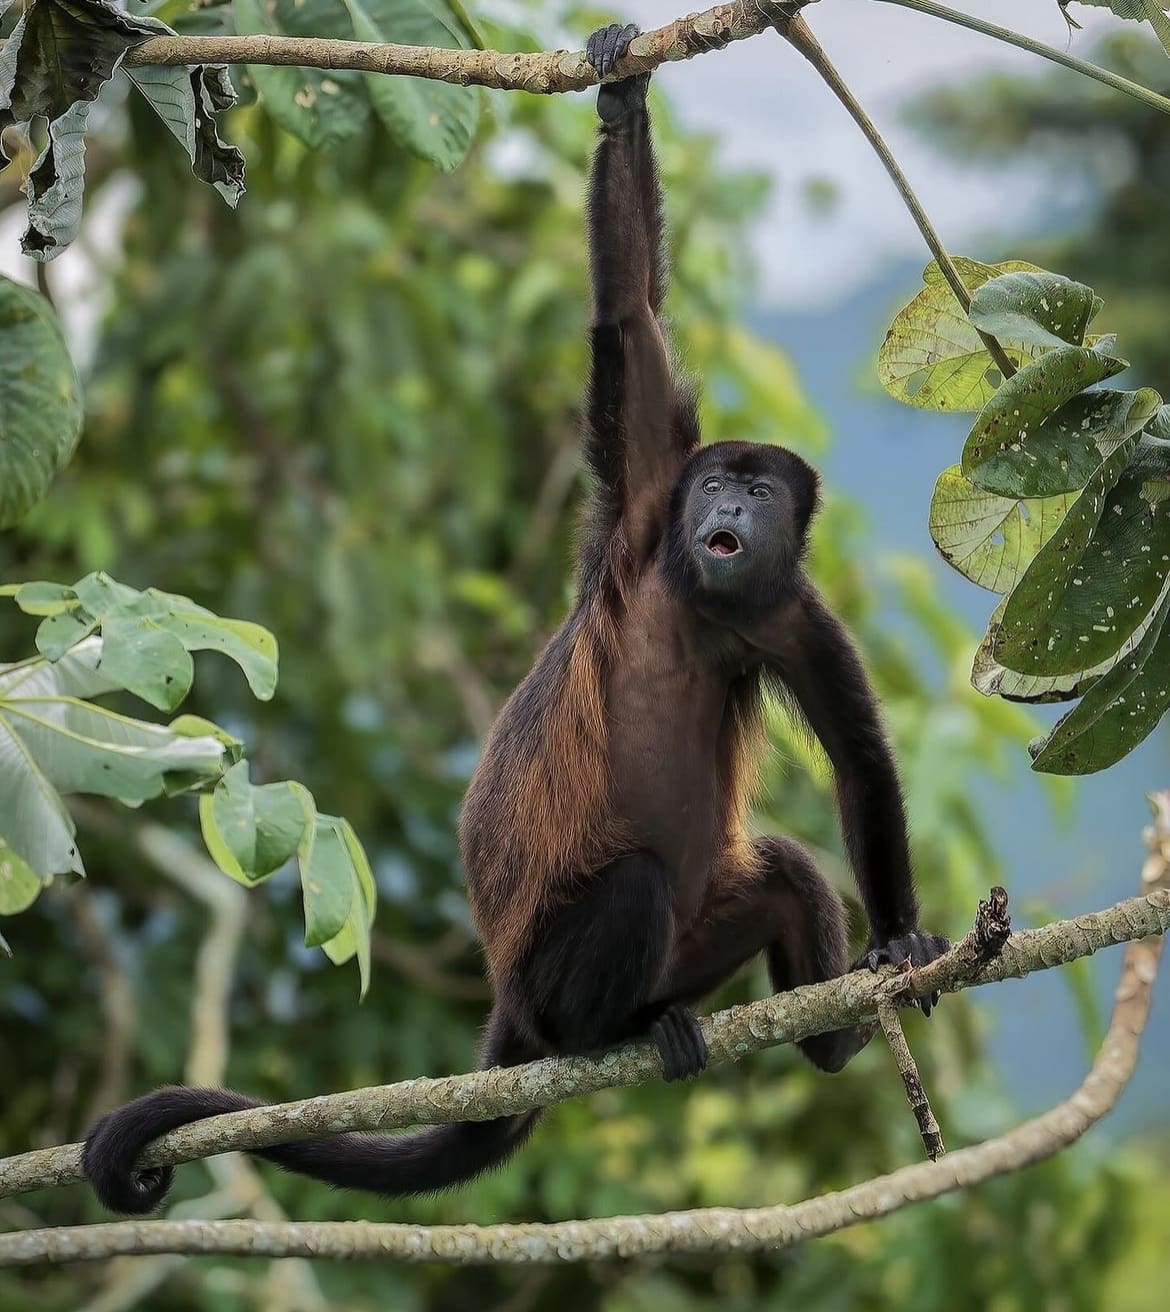 Howler monkey swinging in the trees